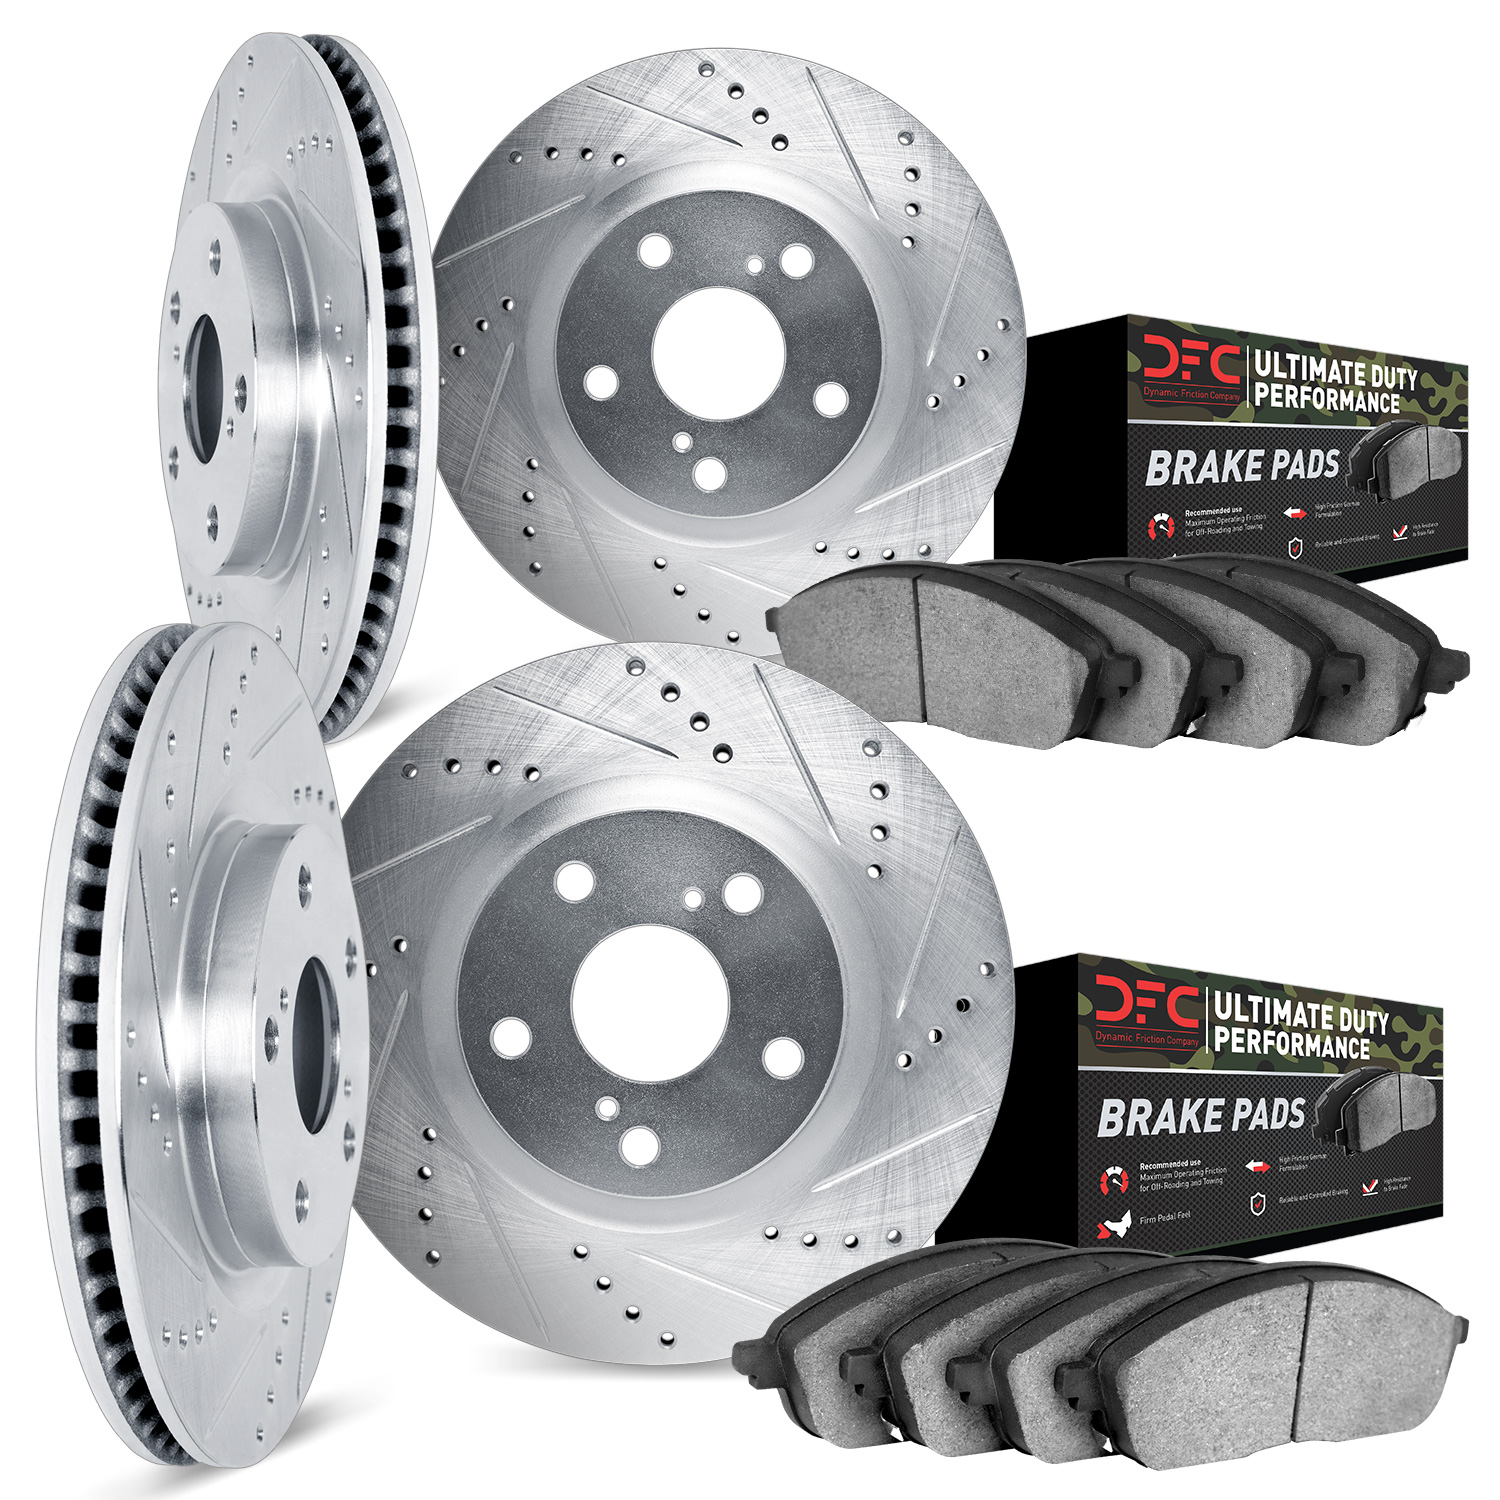 7404-76007 Drilled/Slotted Brake Rotors with Ultimate-Duty Brake Pads Kit [Silver], 2008-2021 Lexus/Toyota/Scion, Position: Fron